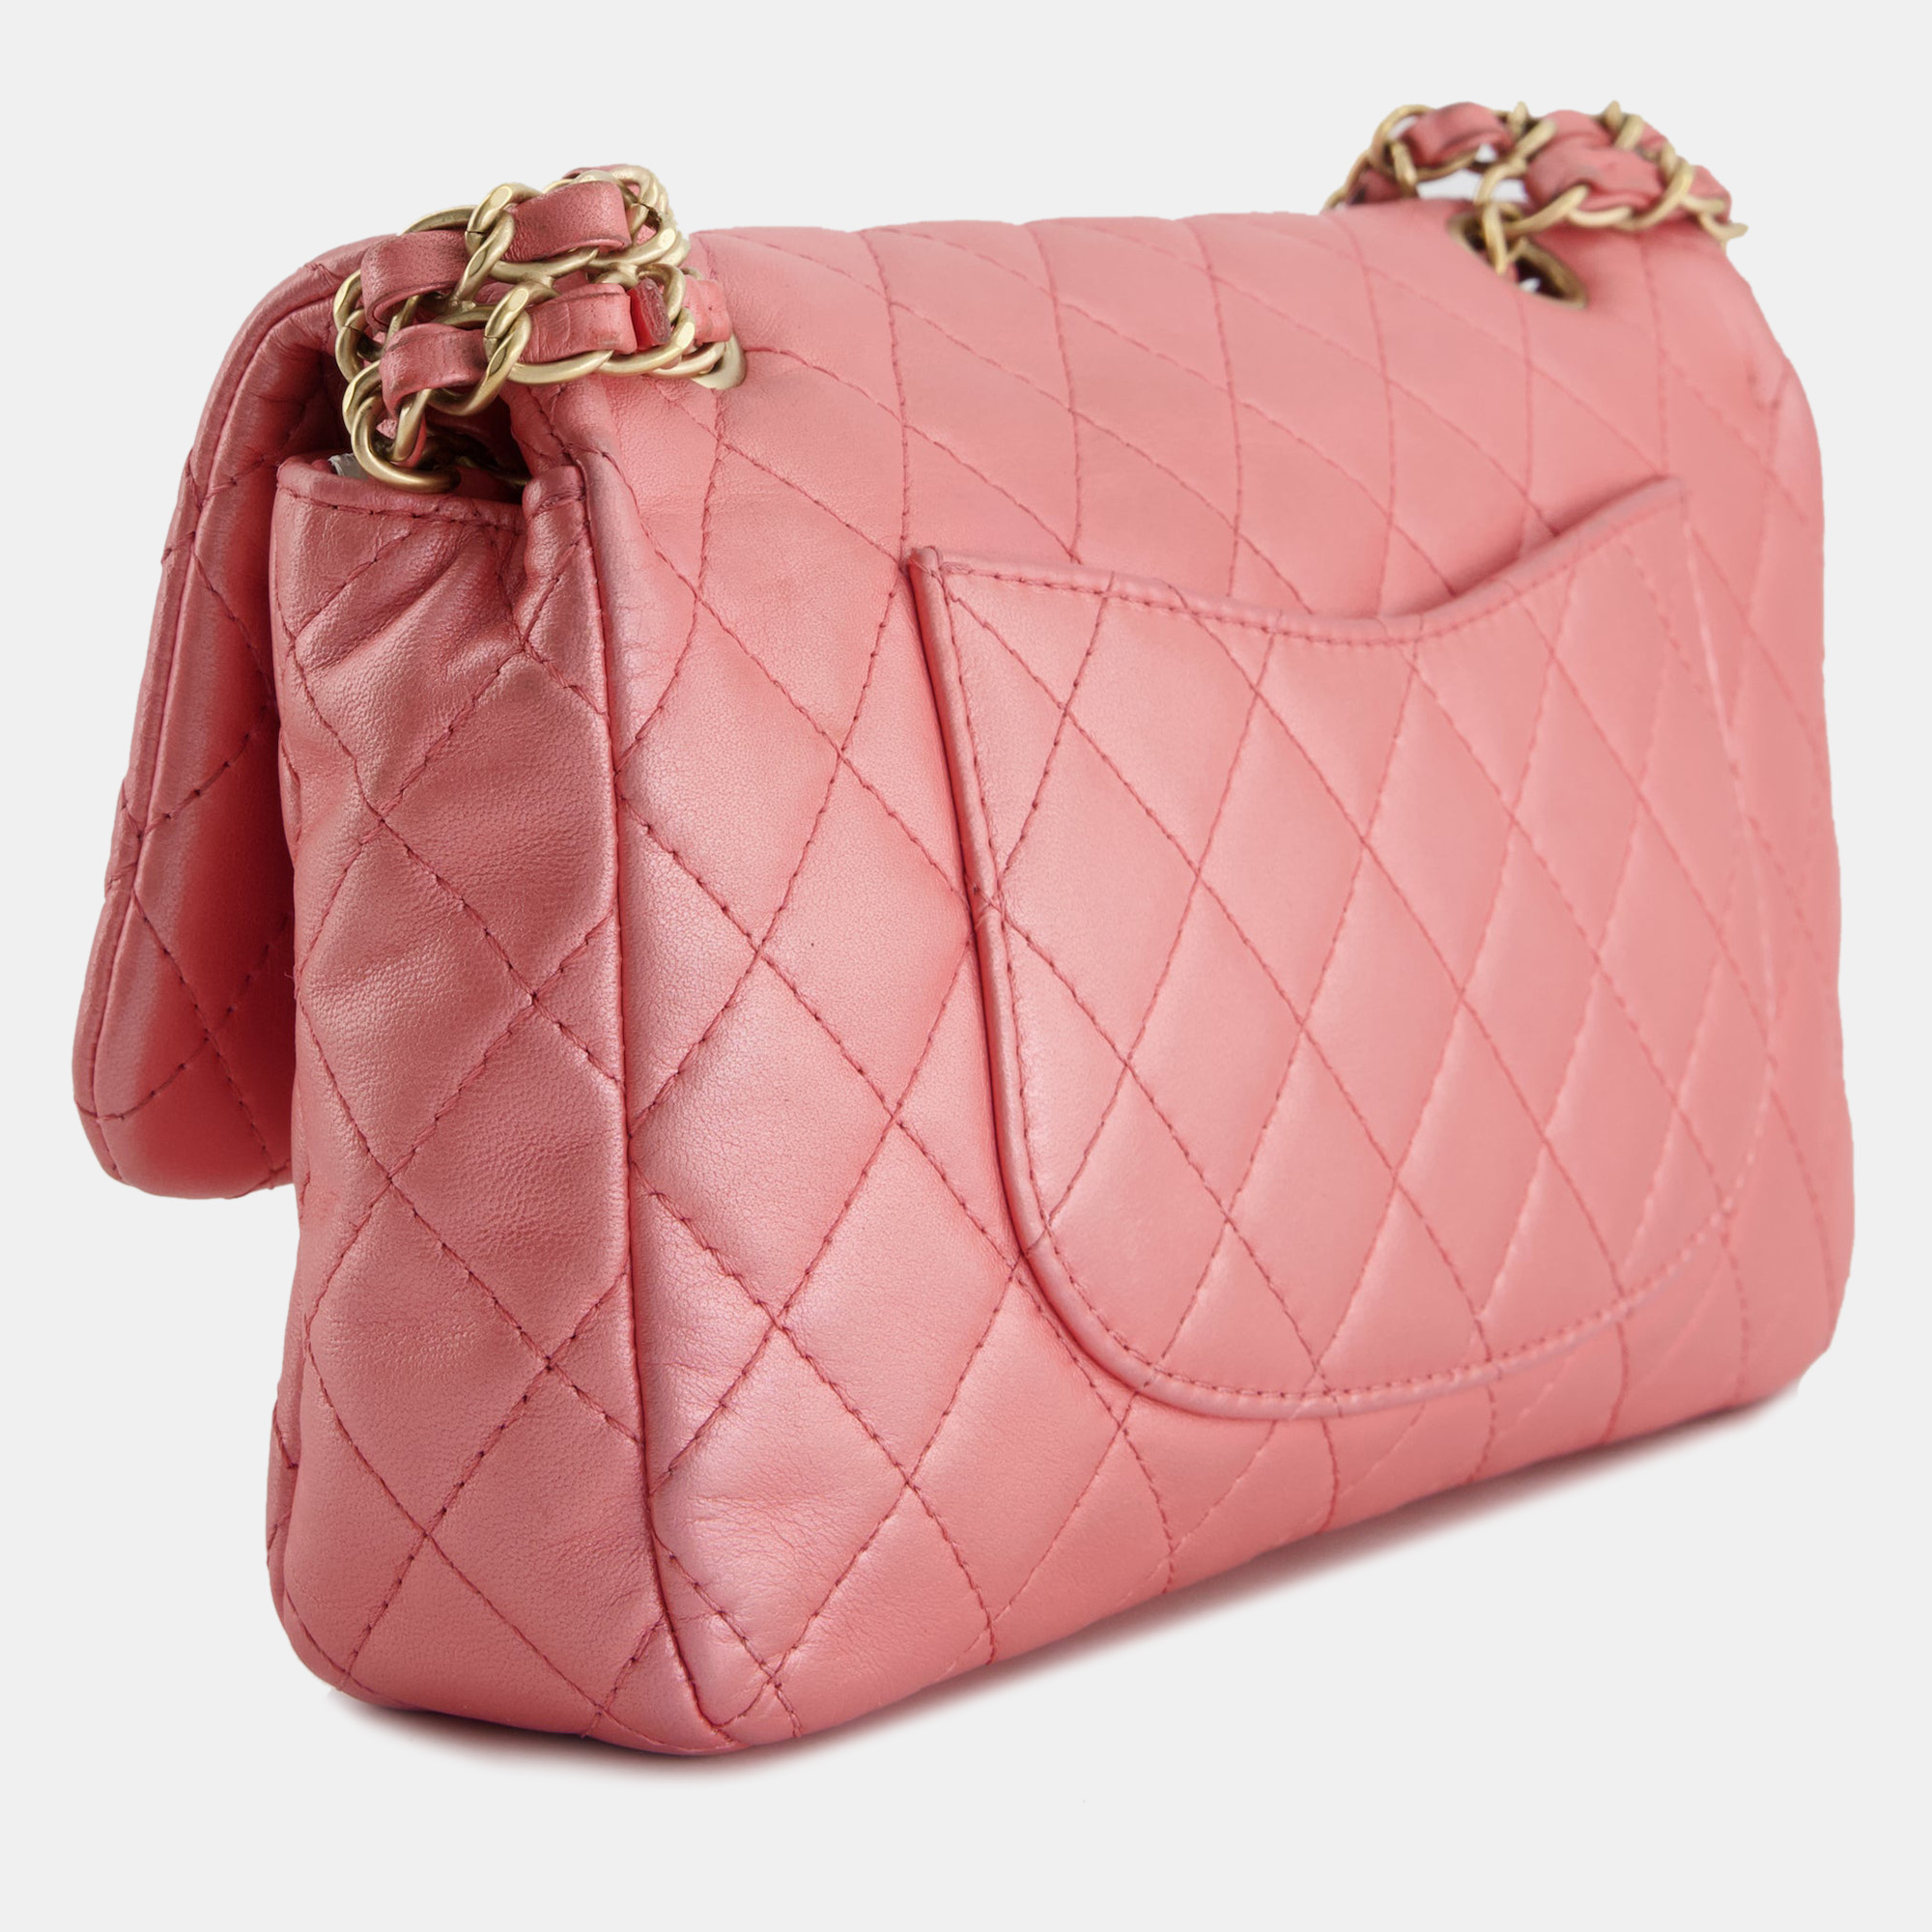 Chanel Pink Metallic Single Flap Shoulder Bag In Lambskin Leather With Gold And Precious Stone Hardware